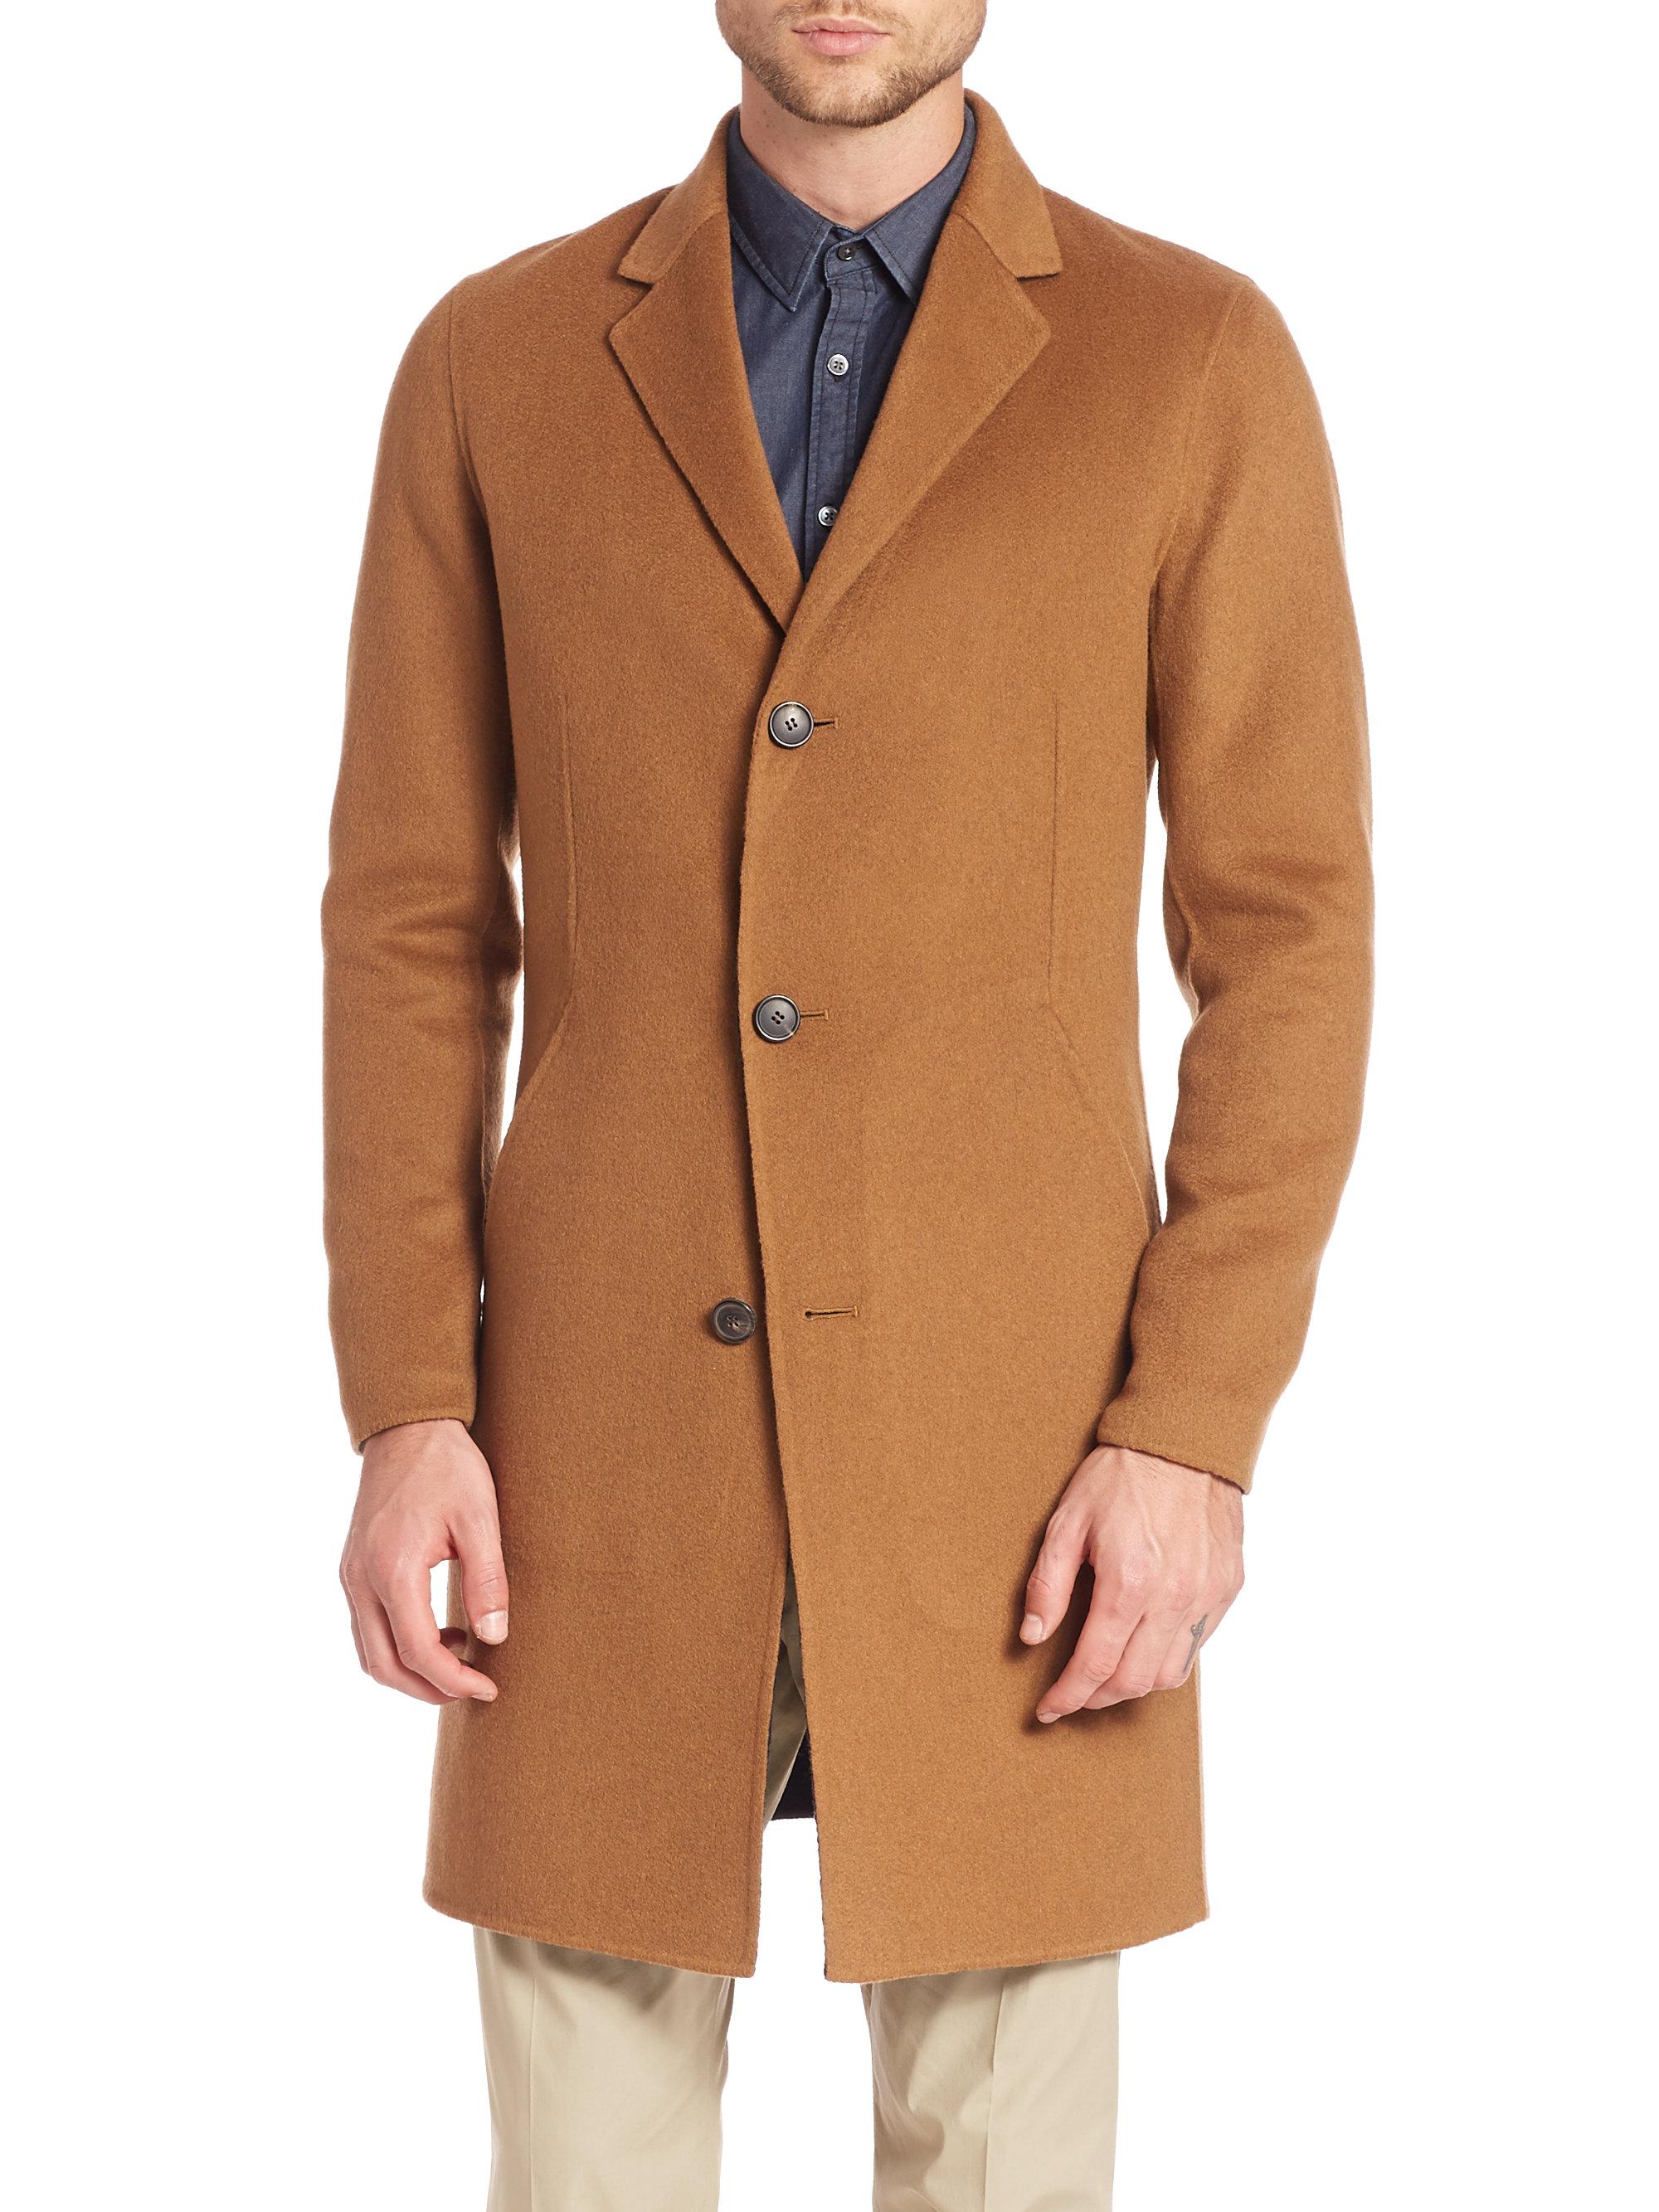 Lyst - Theory Delancey Double-face Cashmere Coat in Brown for Men